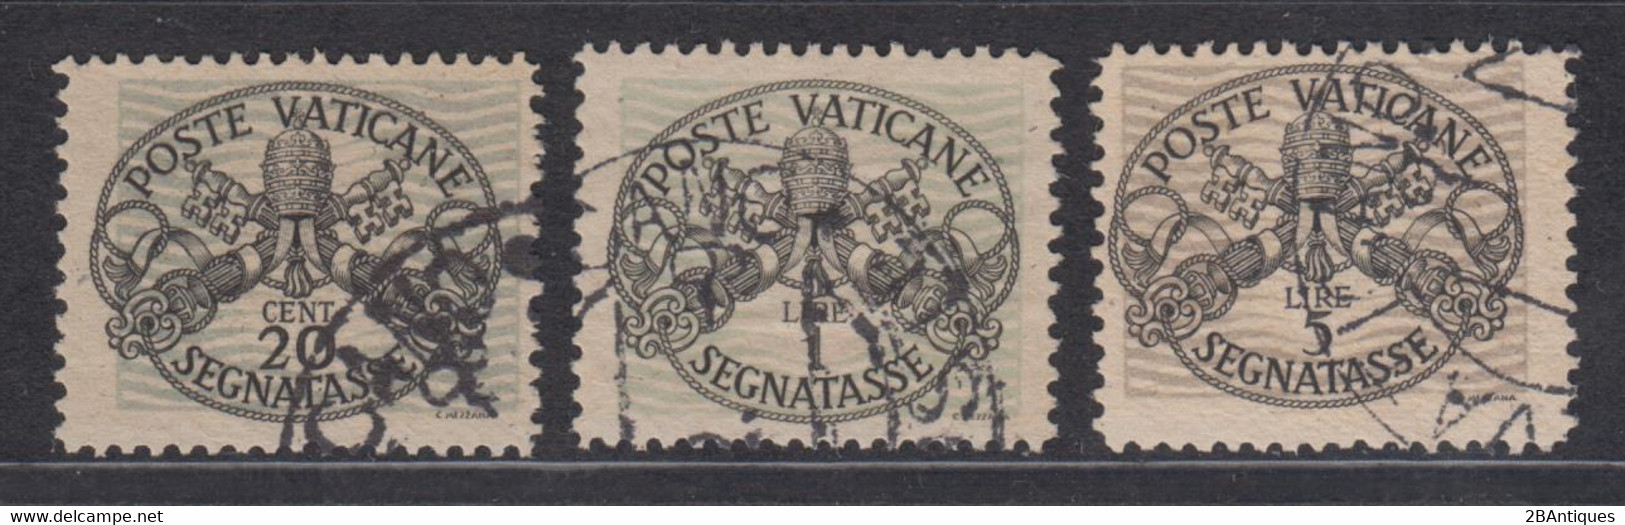 VATICANE 1931 - Postage Due Type II Thick Lines, Grey Paper RARE! - Strafport